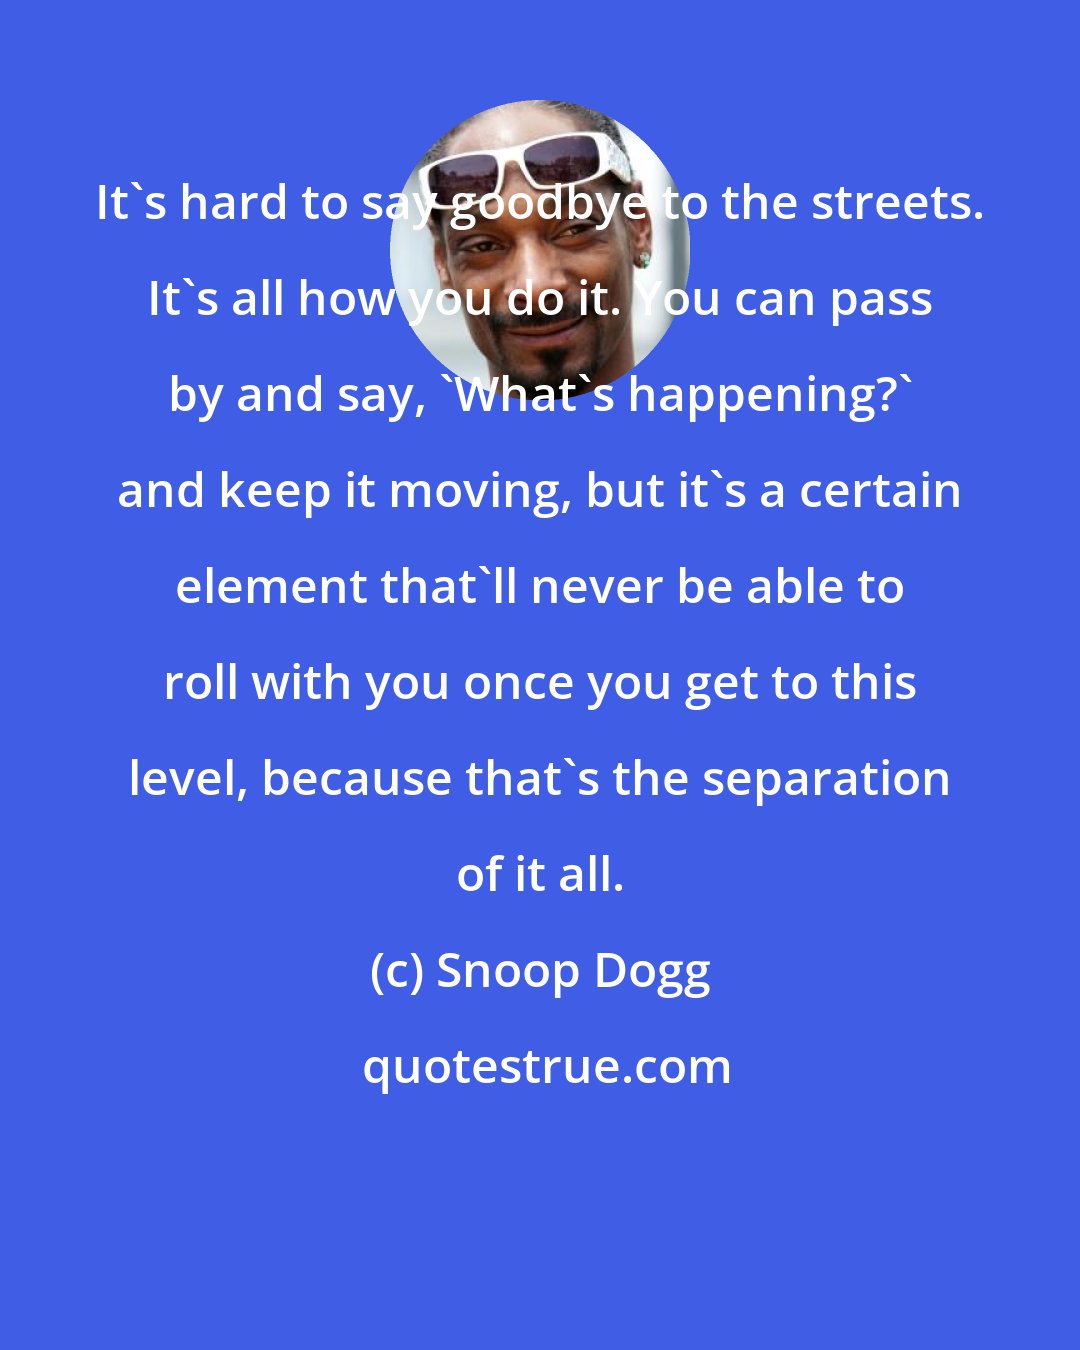 Snoop Dogg: It's hard to say goodbye to the streets. It's all how you do it. You can pass by and say, 'What's happening?' and keep it moving, but it's a certain element that'll never be able to roll with you once you get to this level, because that's the separation of it all.